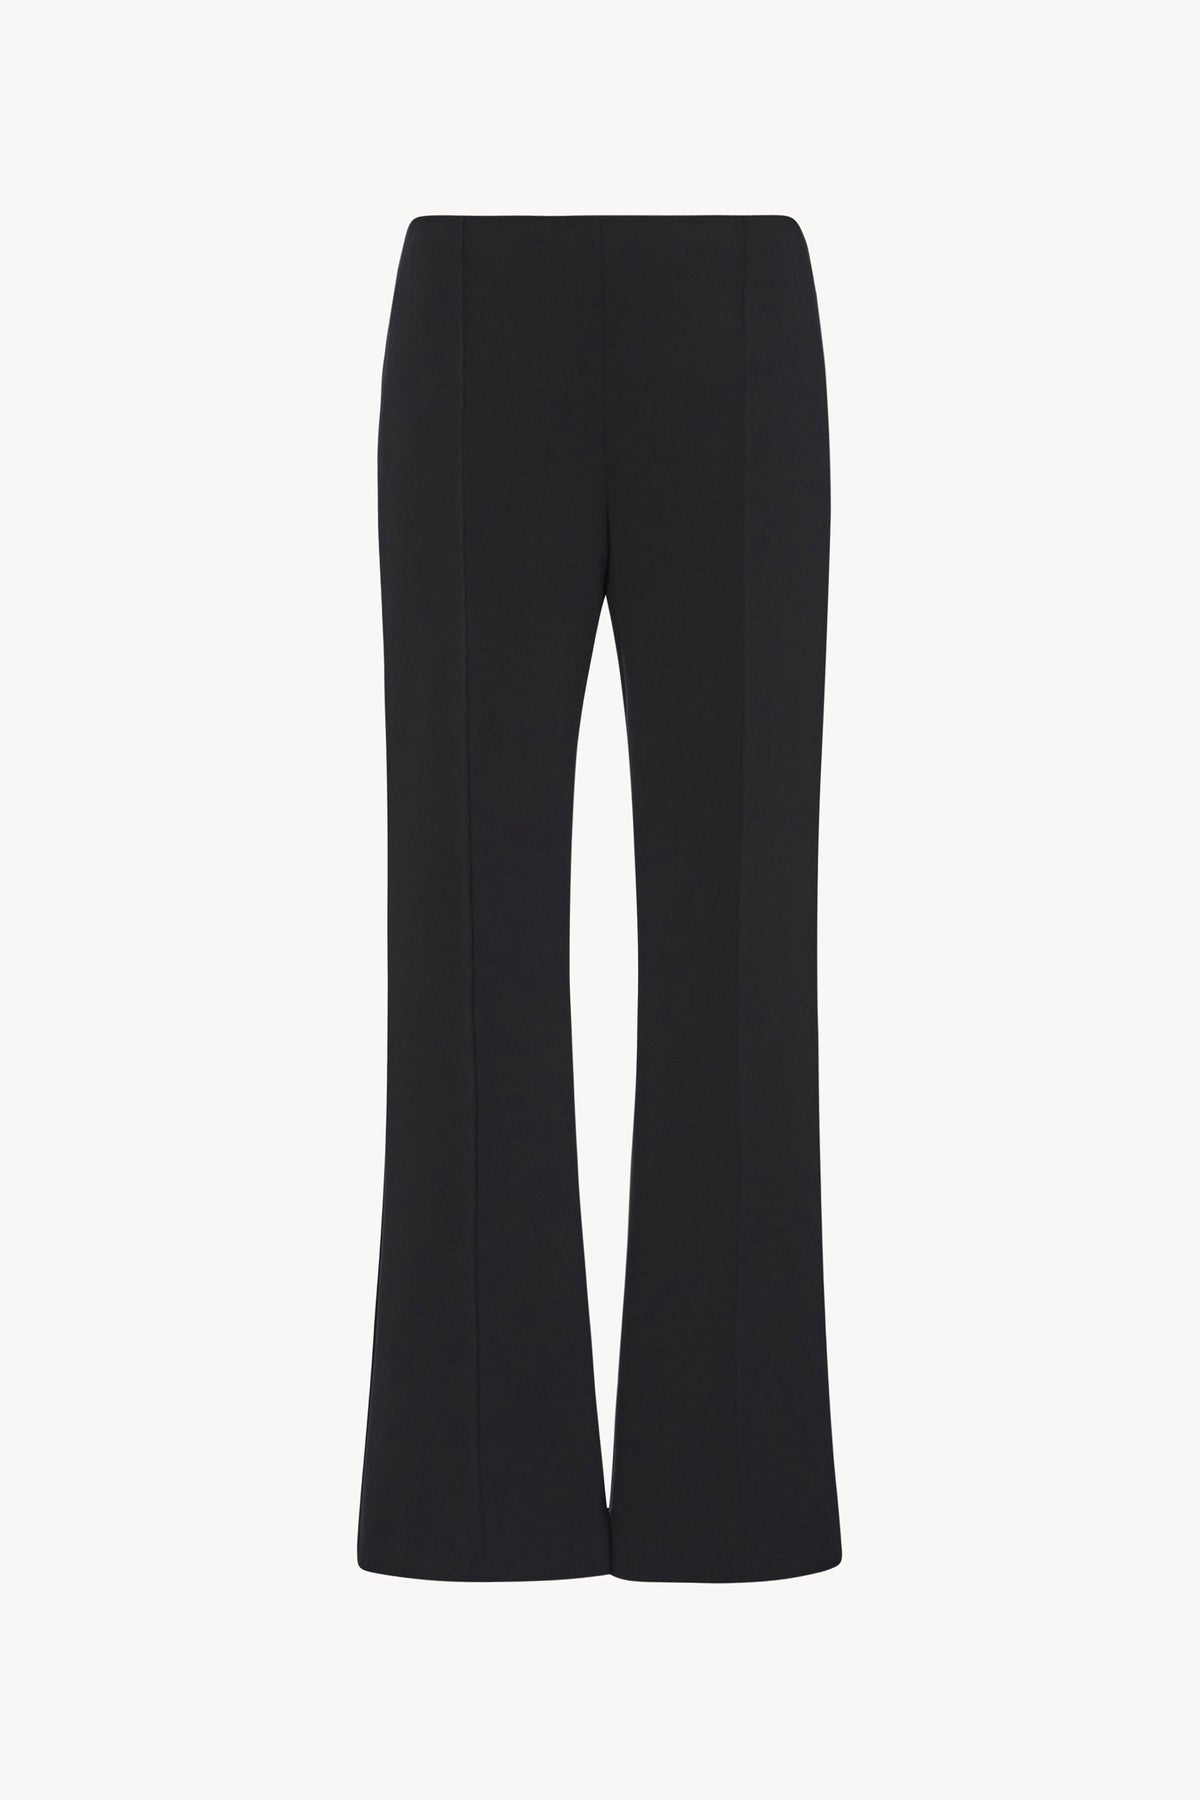 Beca Pant Black in Scuba – The Row